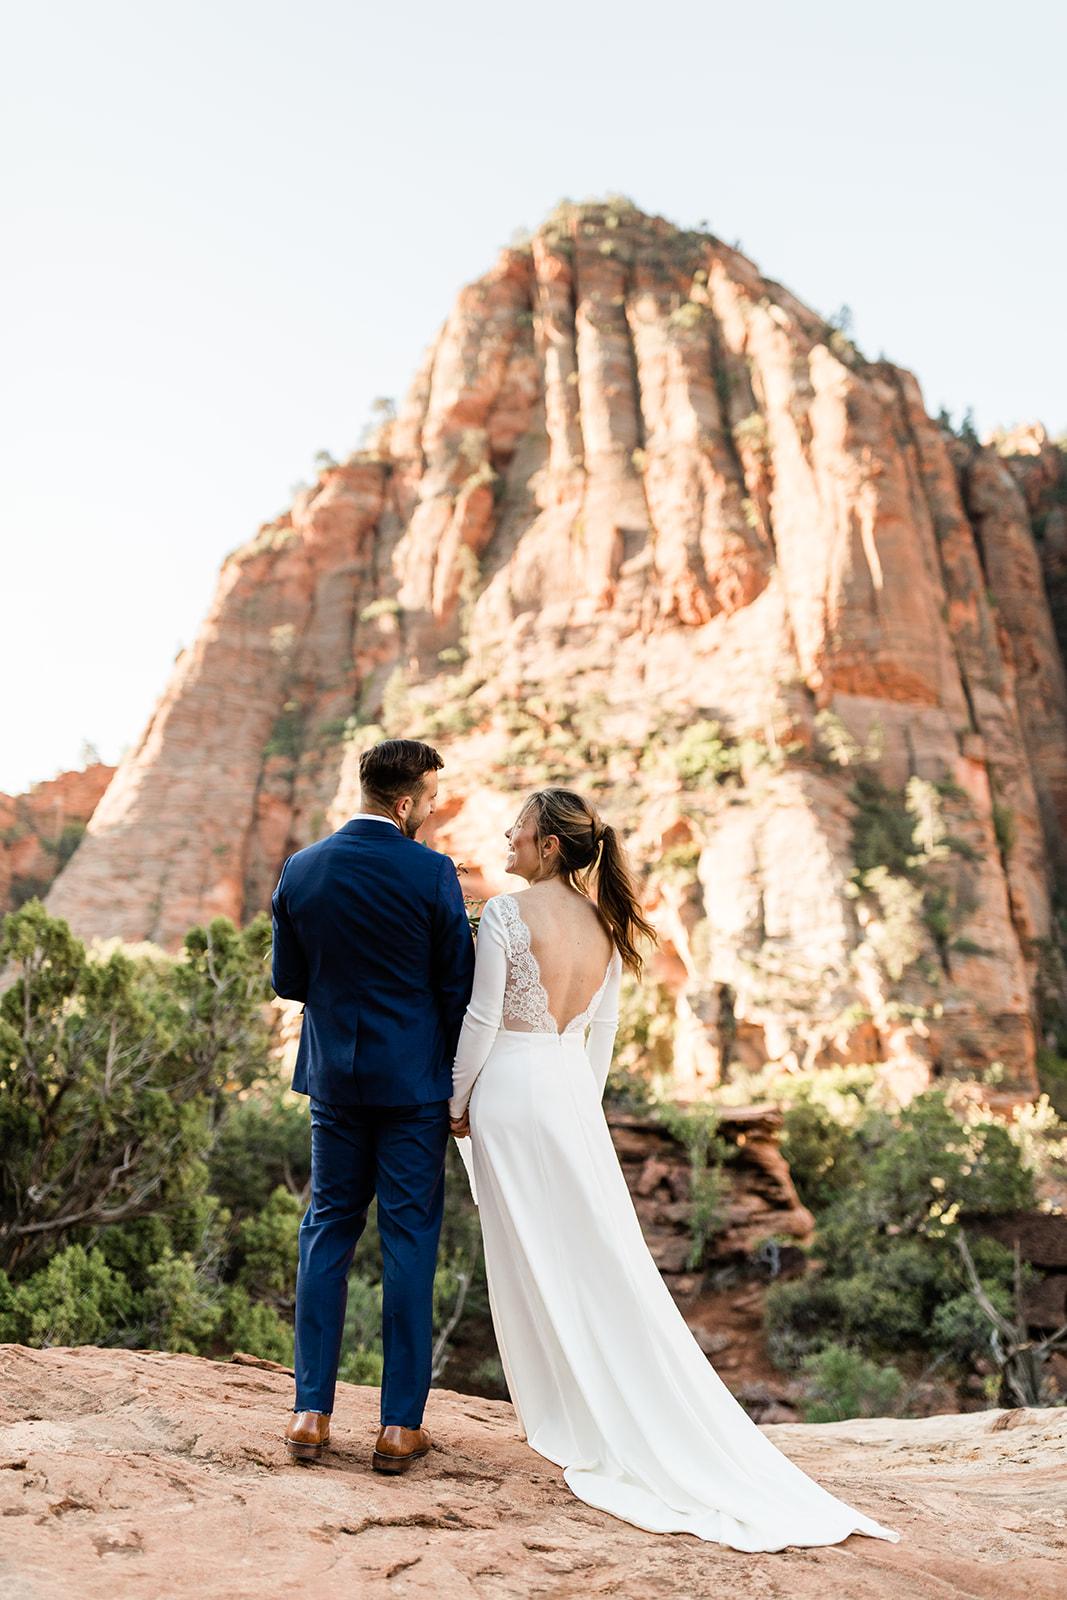 Nick and Kate walk through Zion to their elopement ceremony